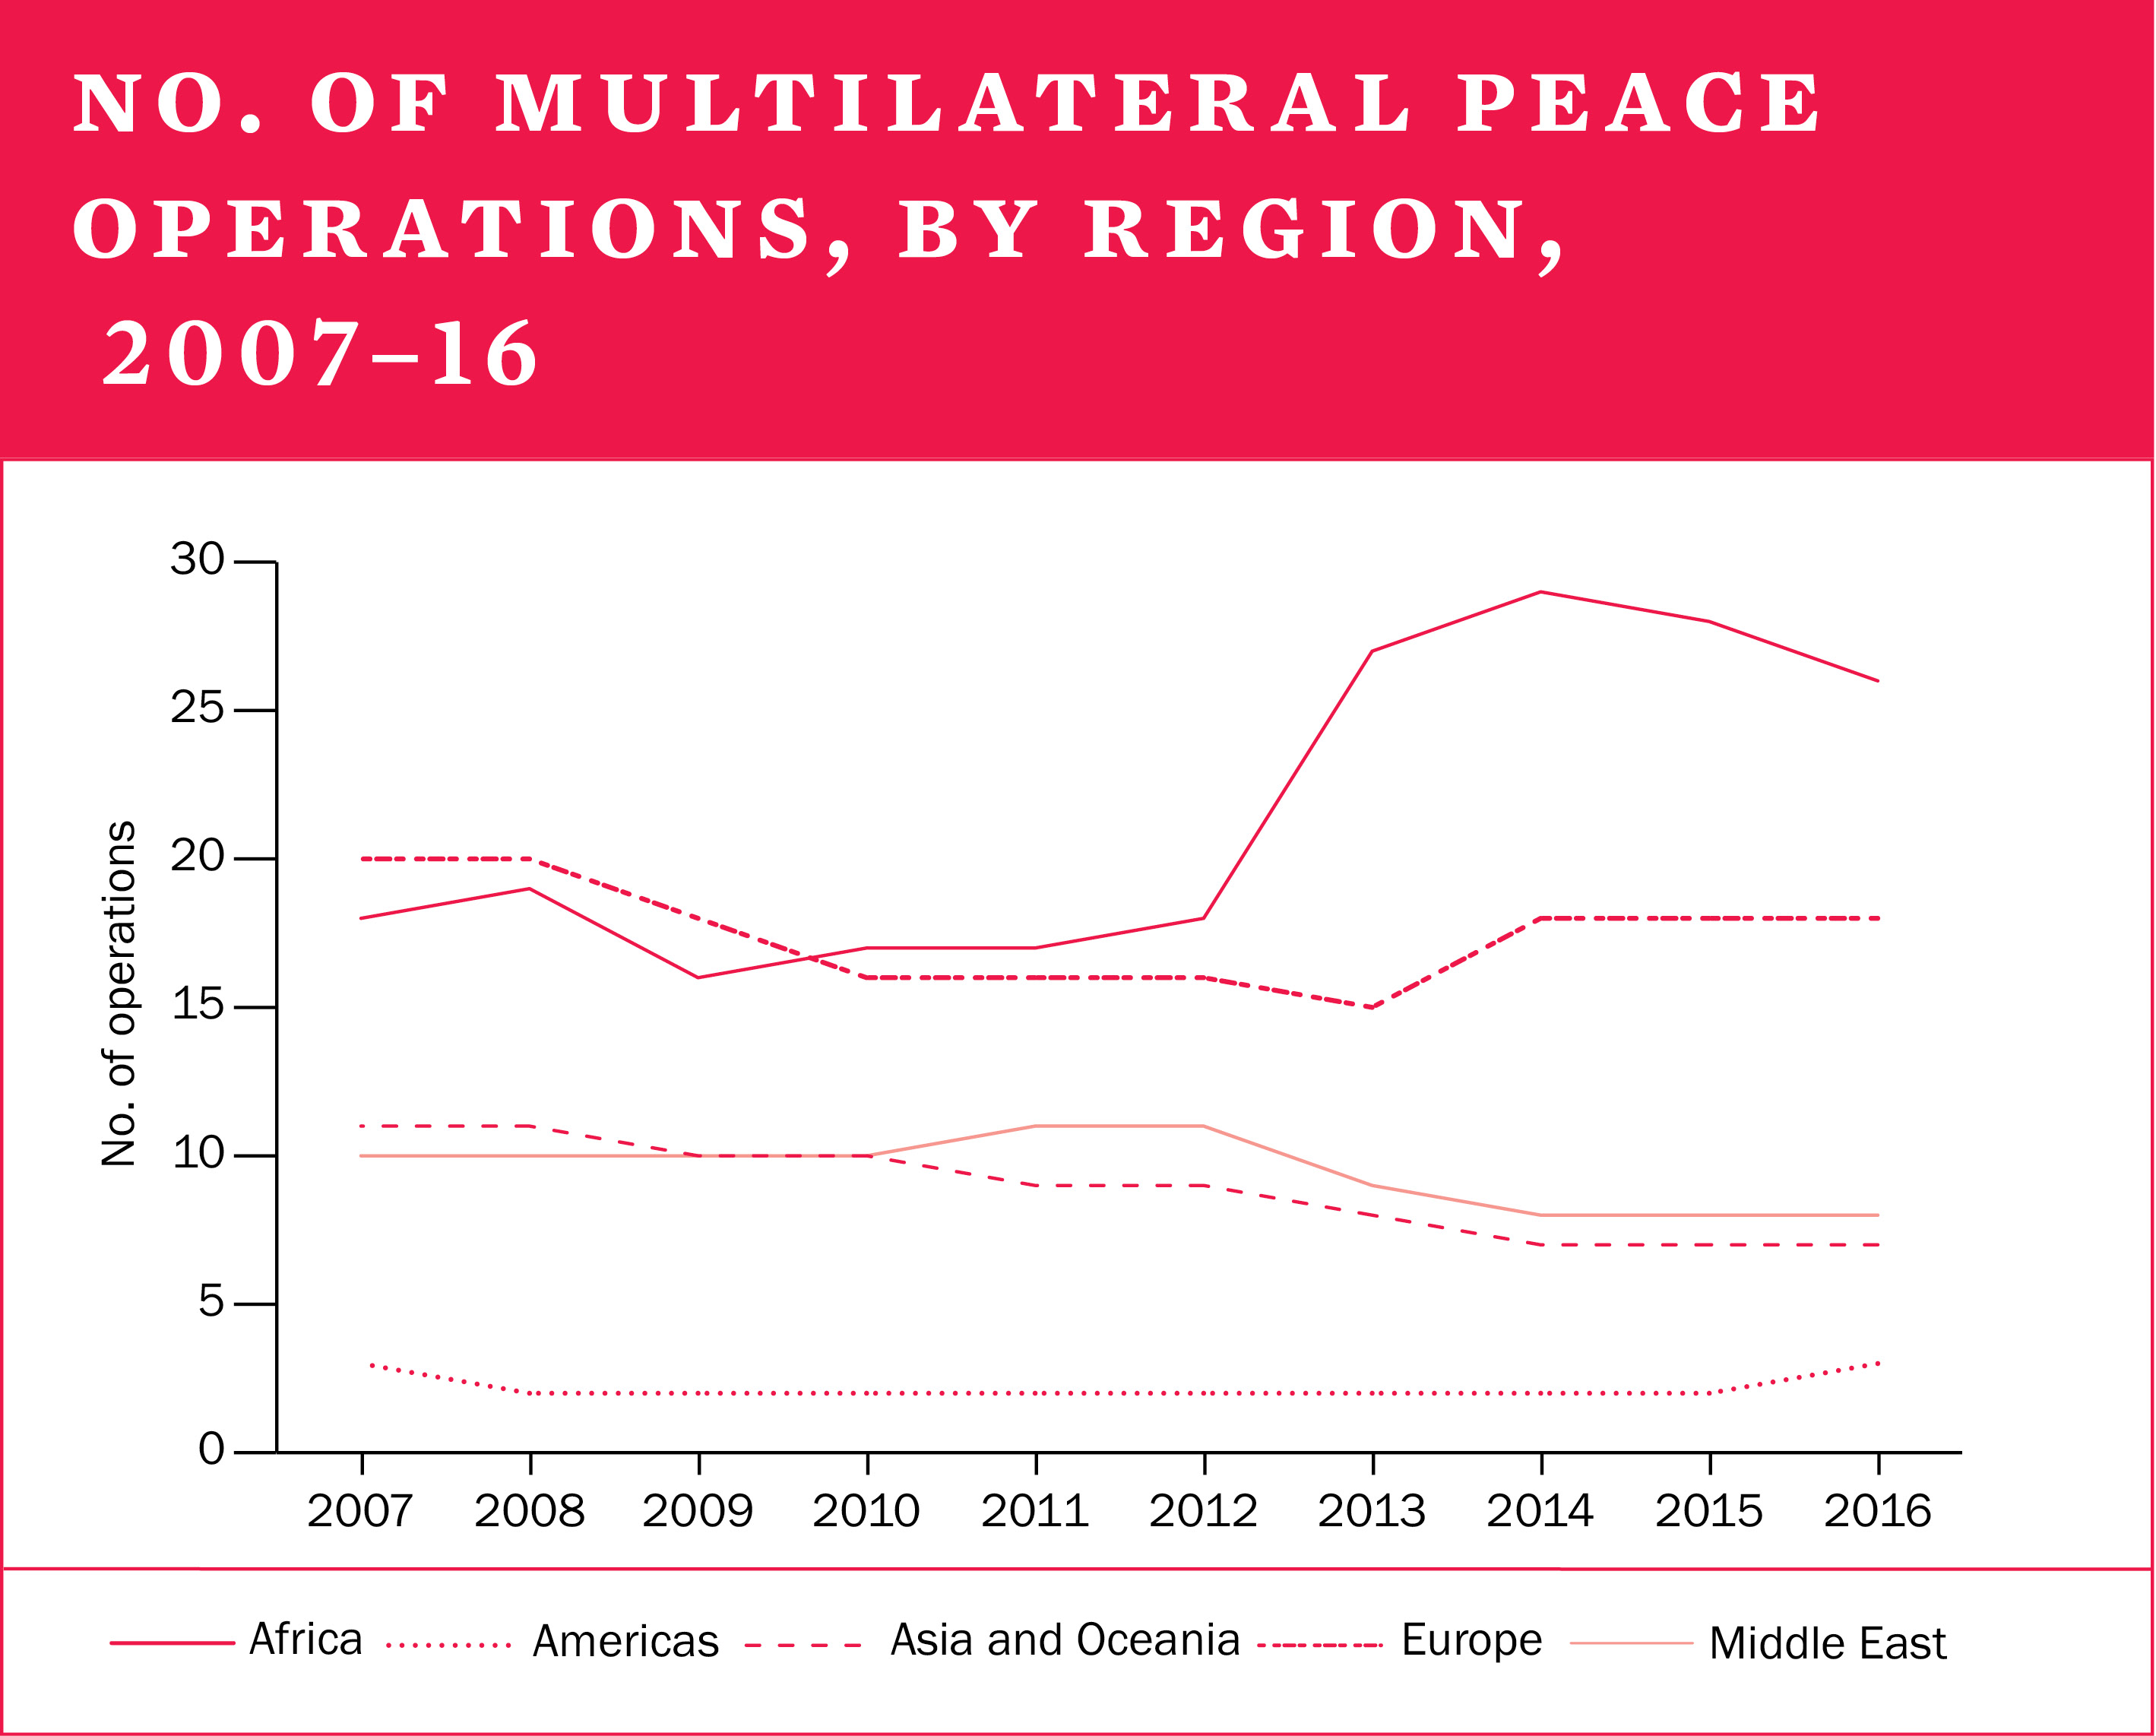 No. of multilateral peace operations, by region, 2007-16